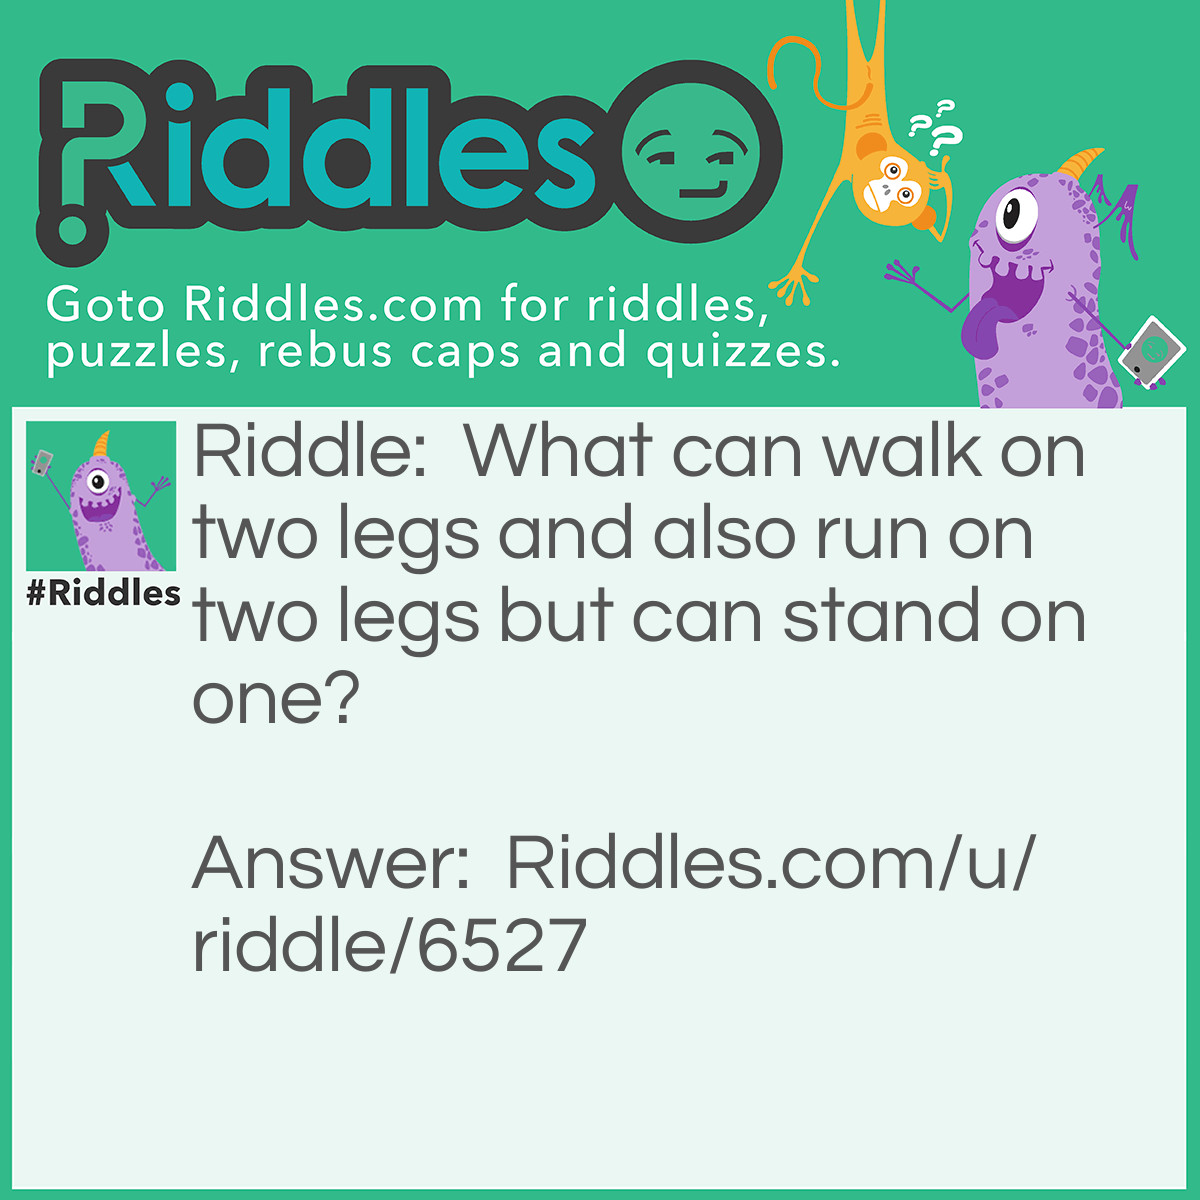 Riddle: What can walk on two legs and also run on two legs but can stand on one? Answer: it is a flamingo.